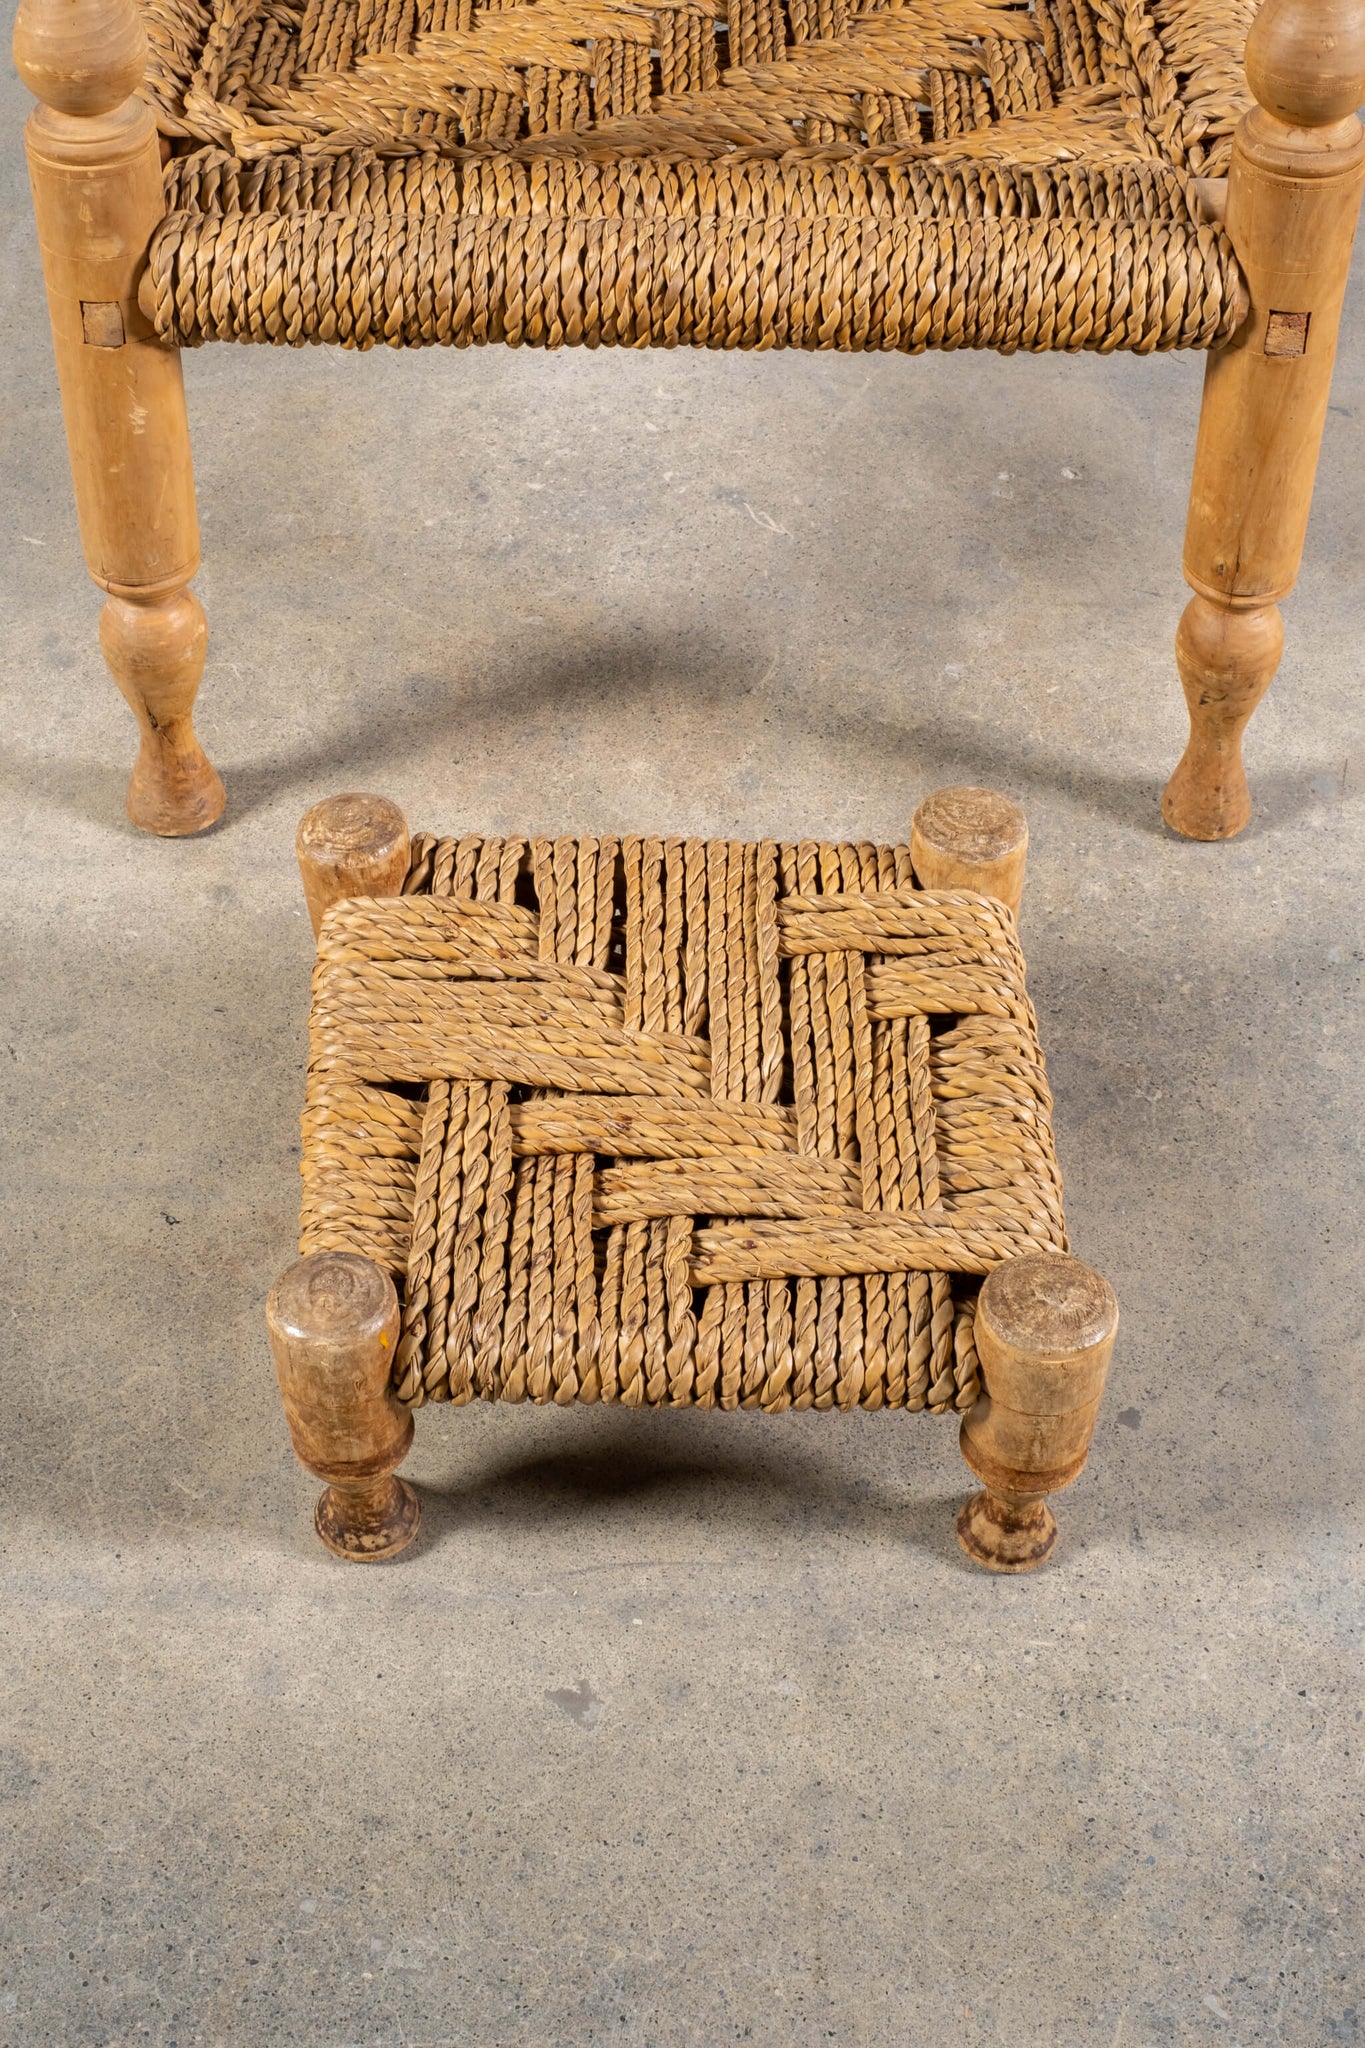 Vintage French Wood and Rope Armchairs with Footstools Adrien Audoux and Frida Minet, footstool detail view